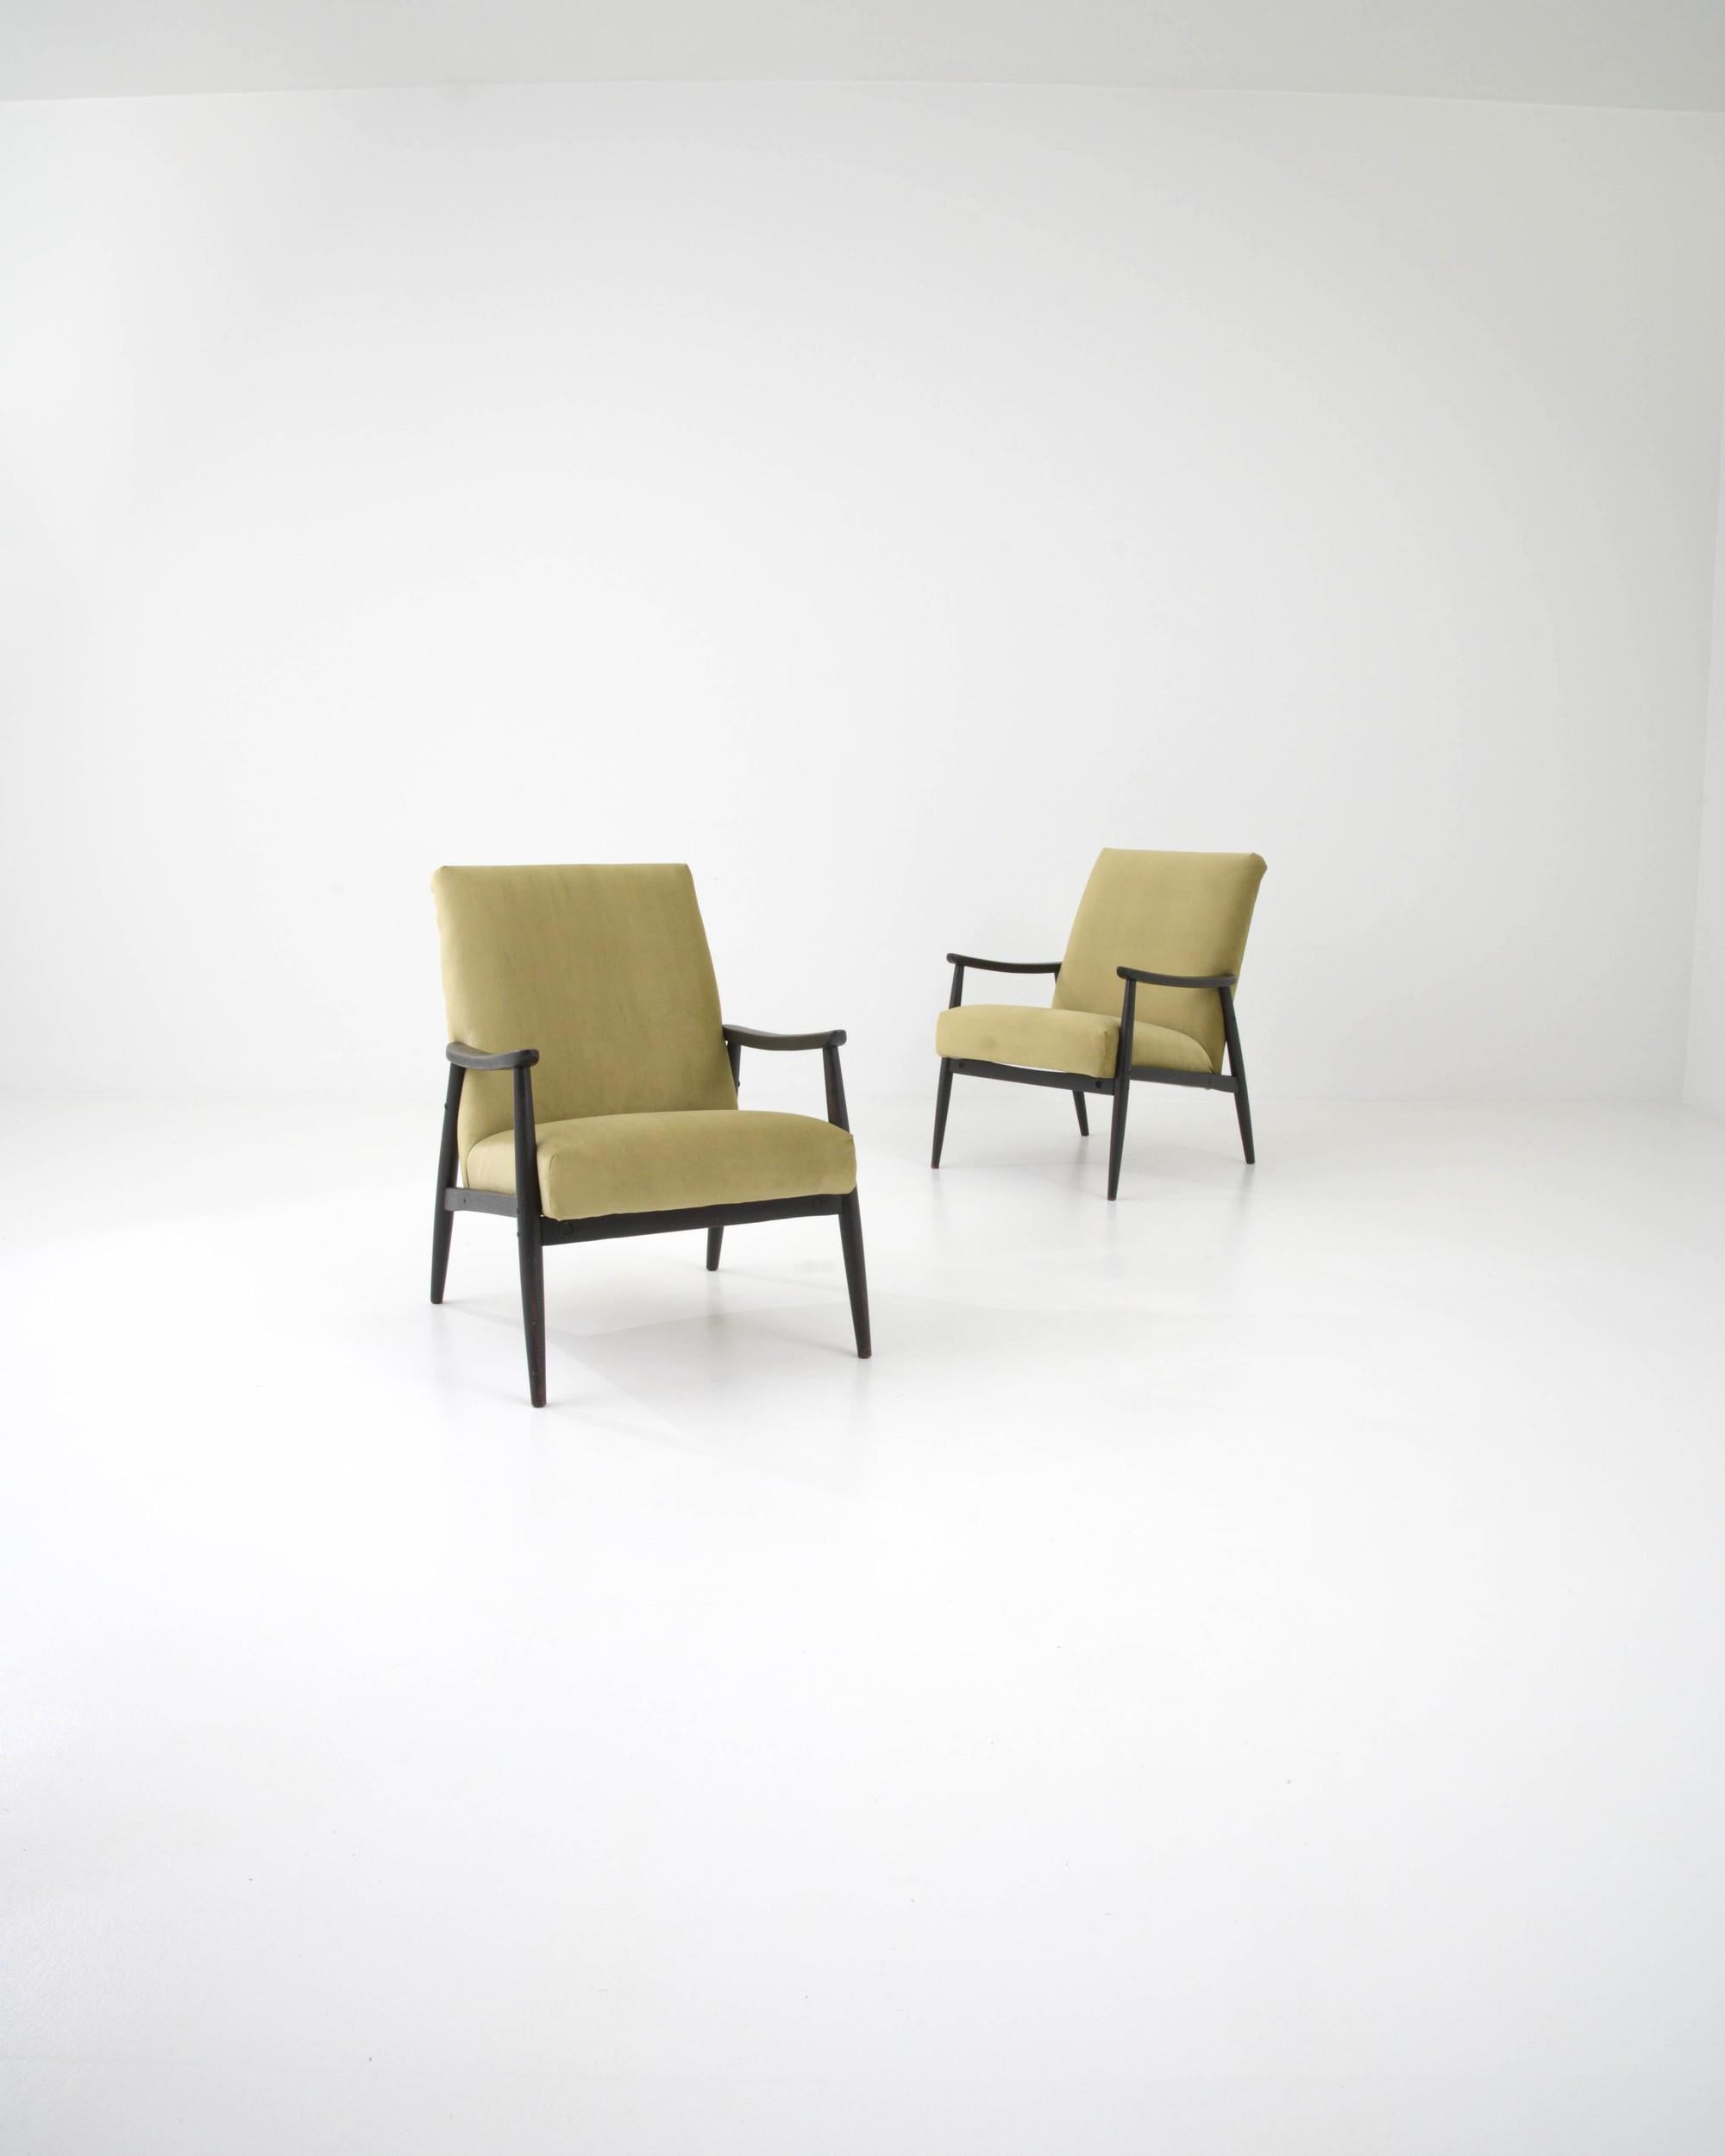 This pair of 1960s Czech armchairs provide the perfect nook in which to watch the world go by. The seat, generously cushioned and set at an inviting recline, seems to float like a cloud between the branches of the angular wooden frame. The velvety